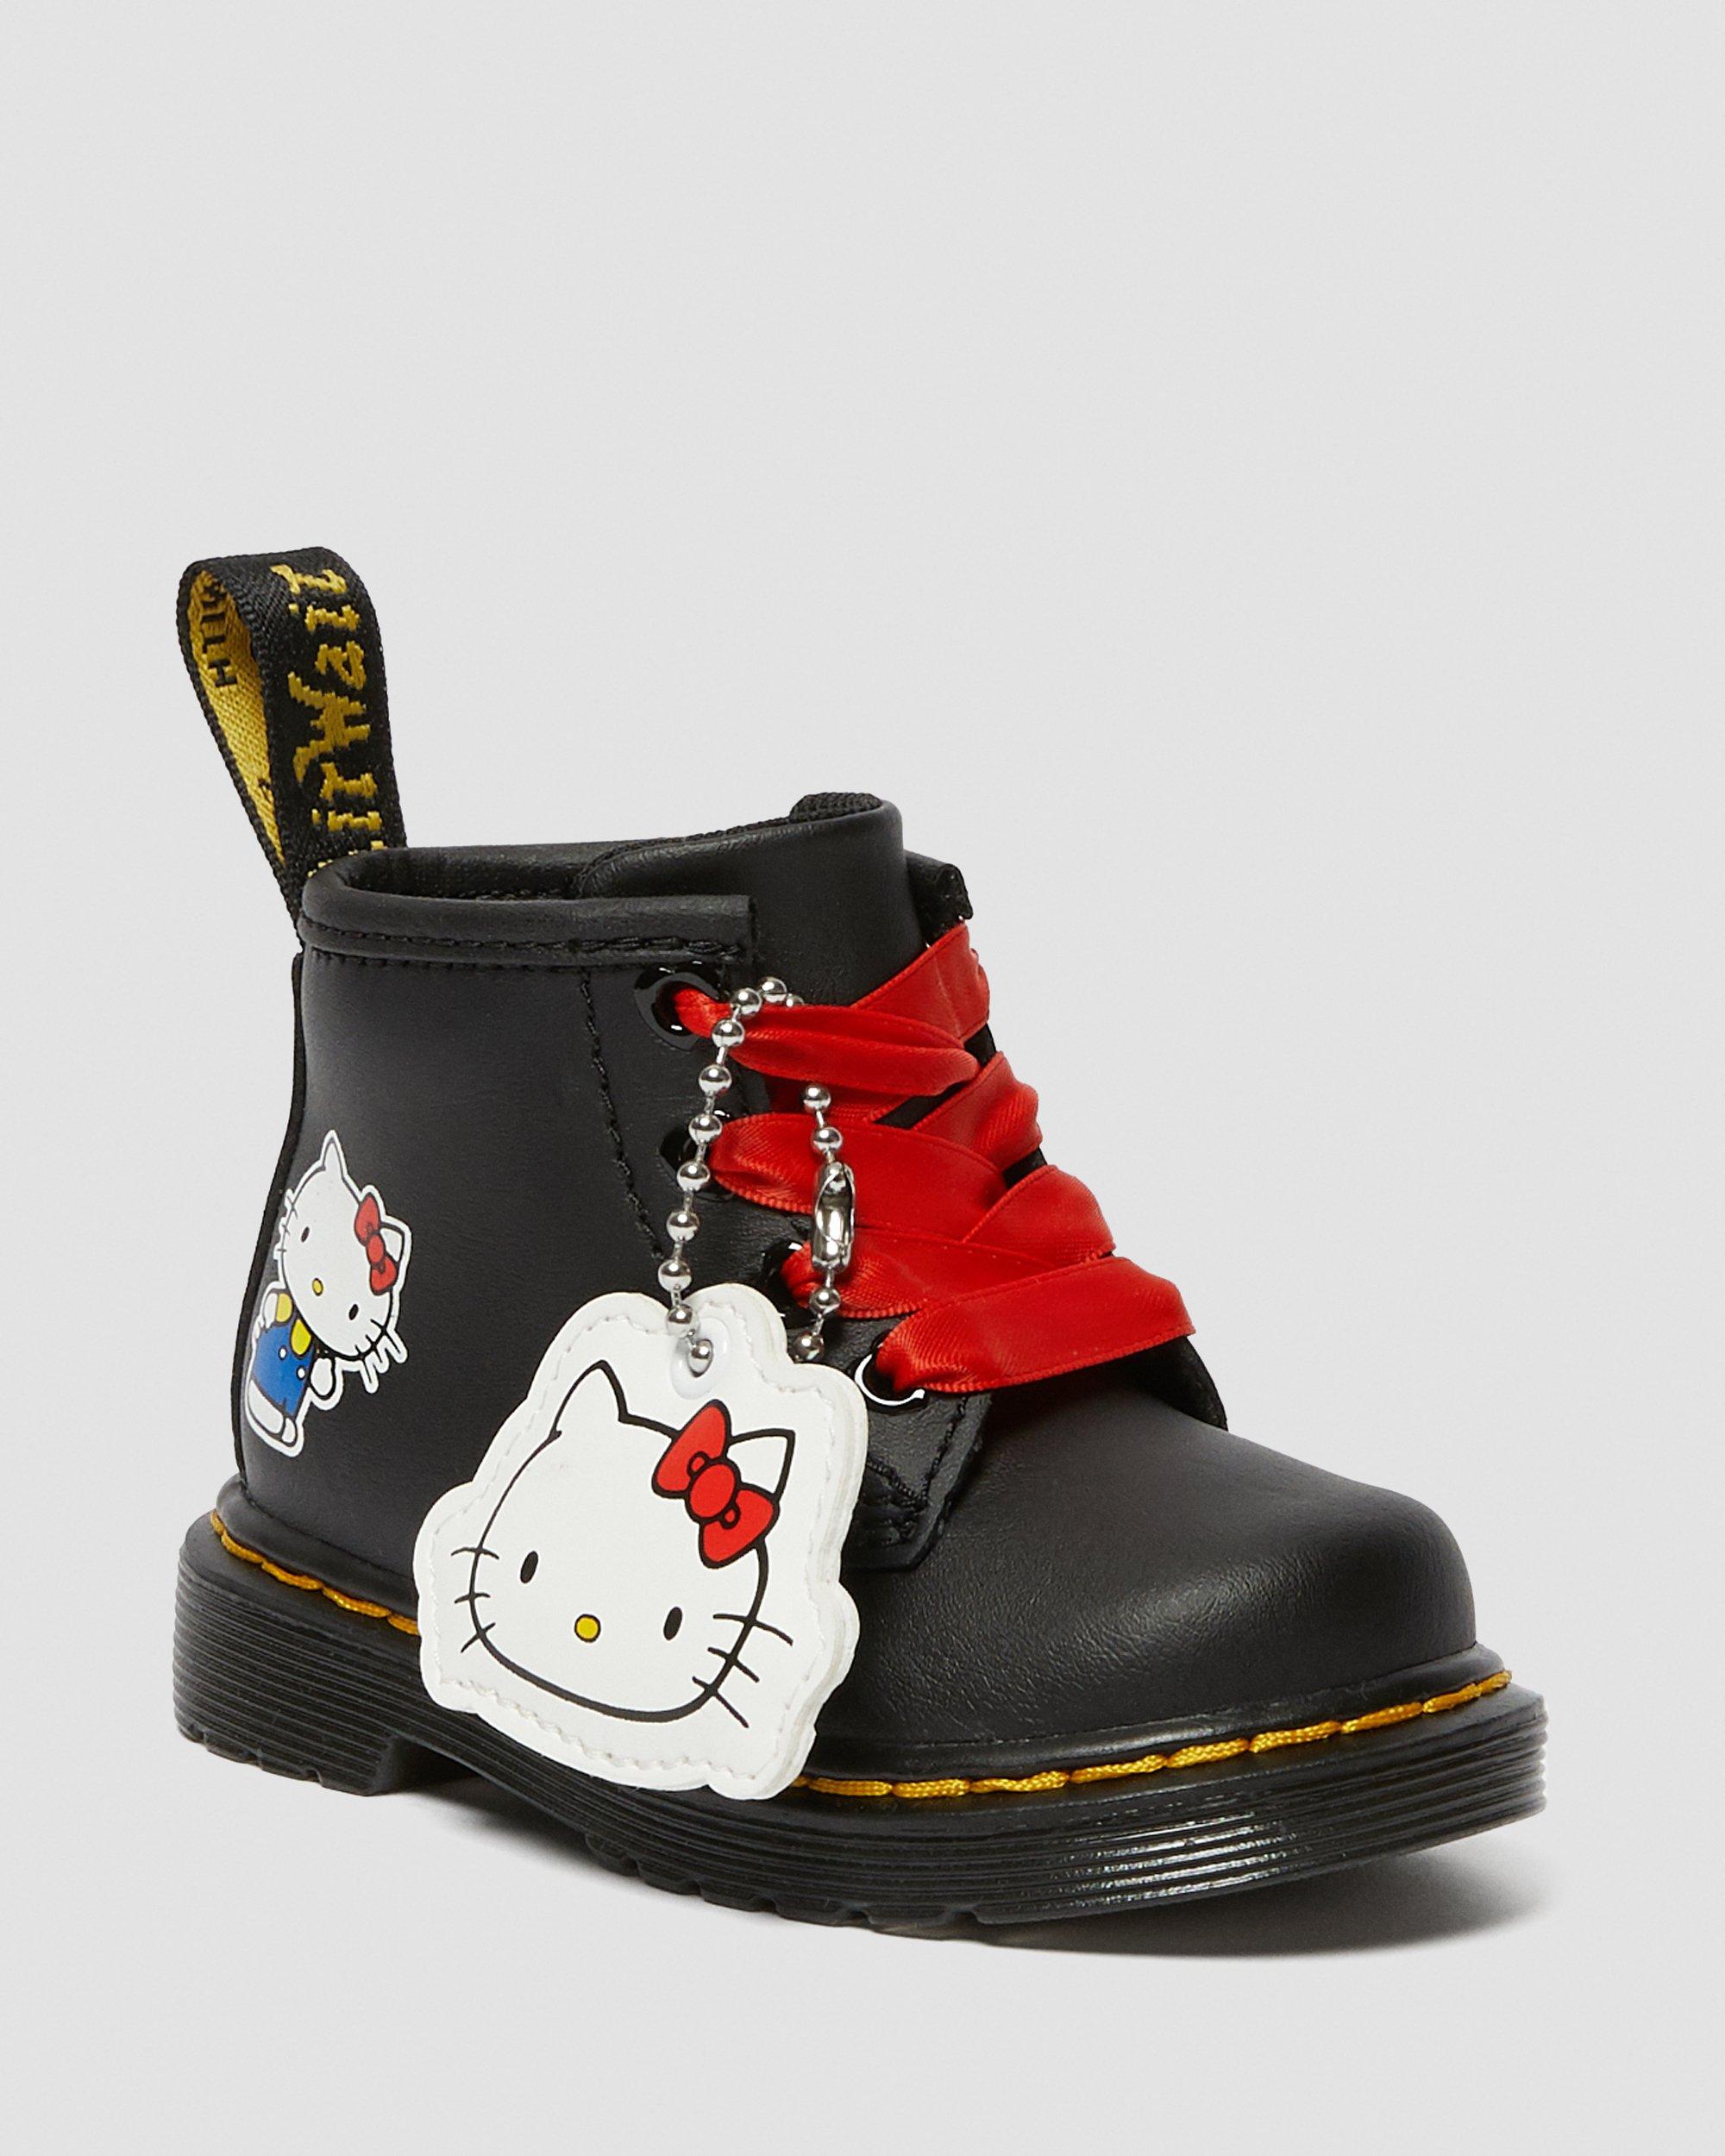 INFANT HELLO KITTY 1460 LEATHER ANKLE BOOTS Dr. Martens